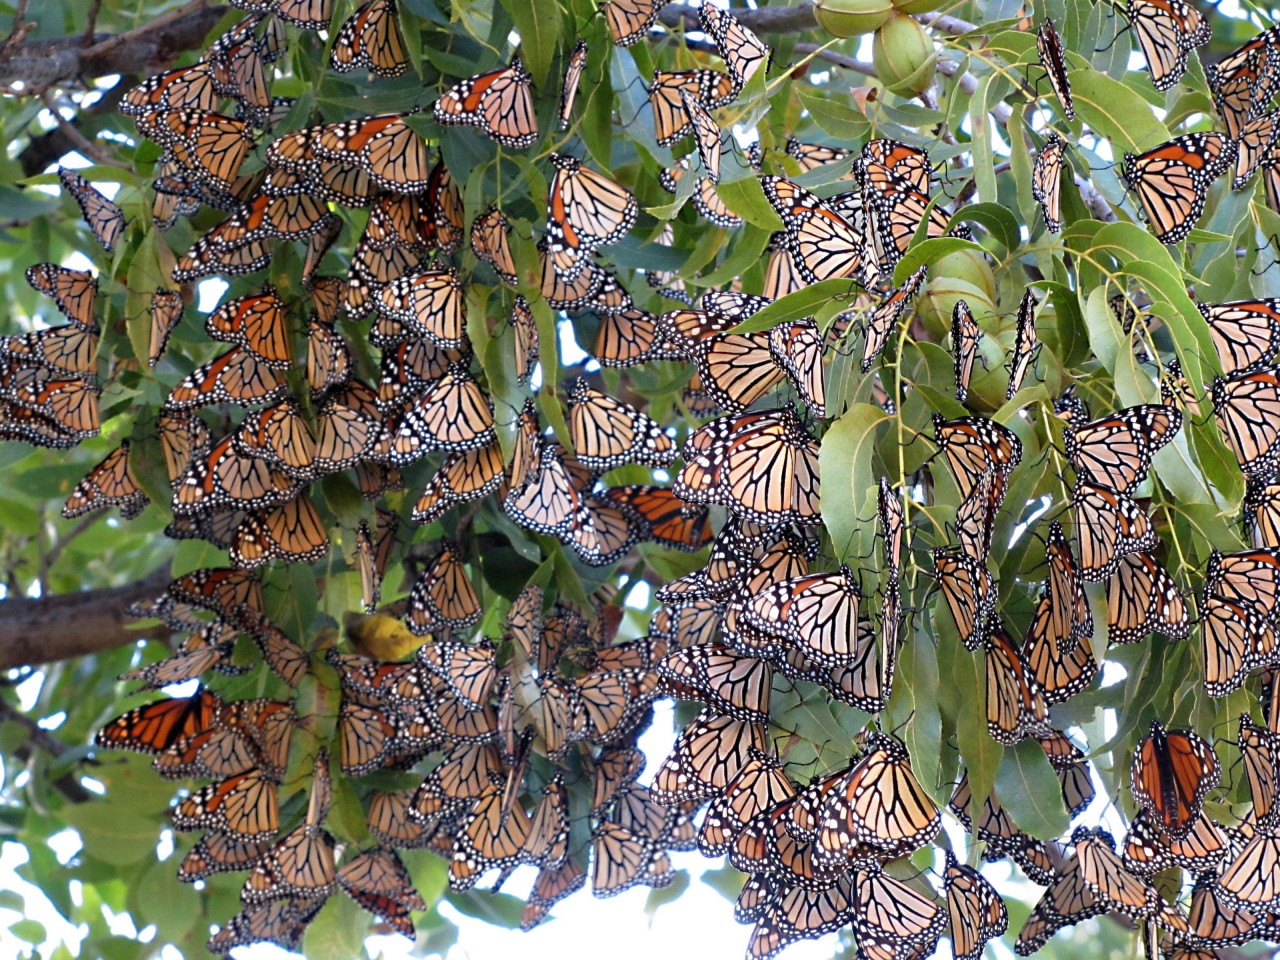 Monarchs migrate alone. They do not travel in flocks the way many birds do. Why do they come together at night and form roosts?